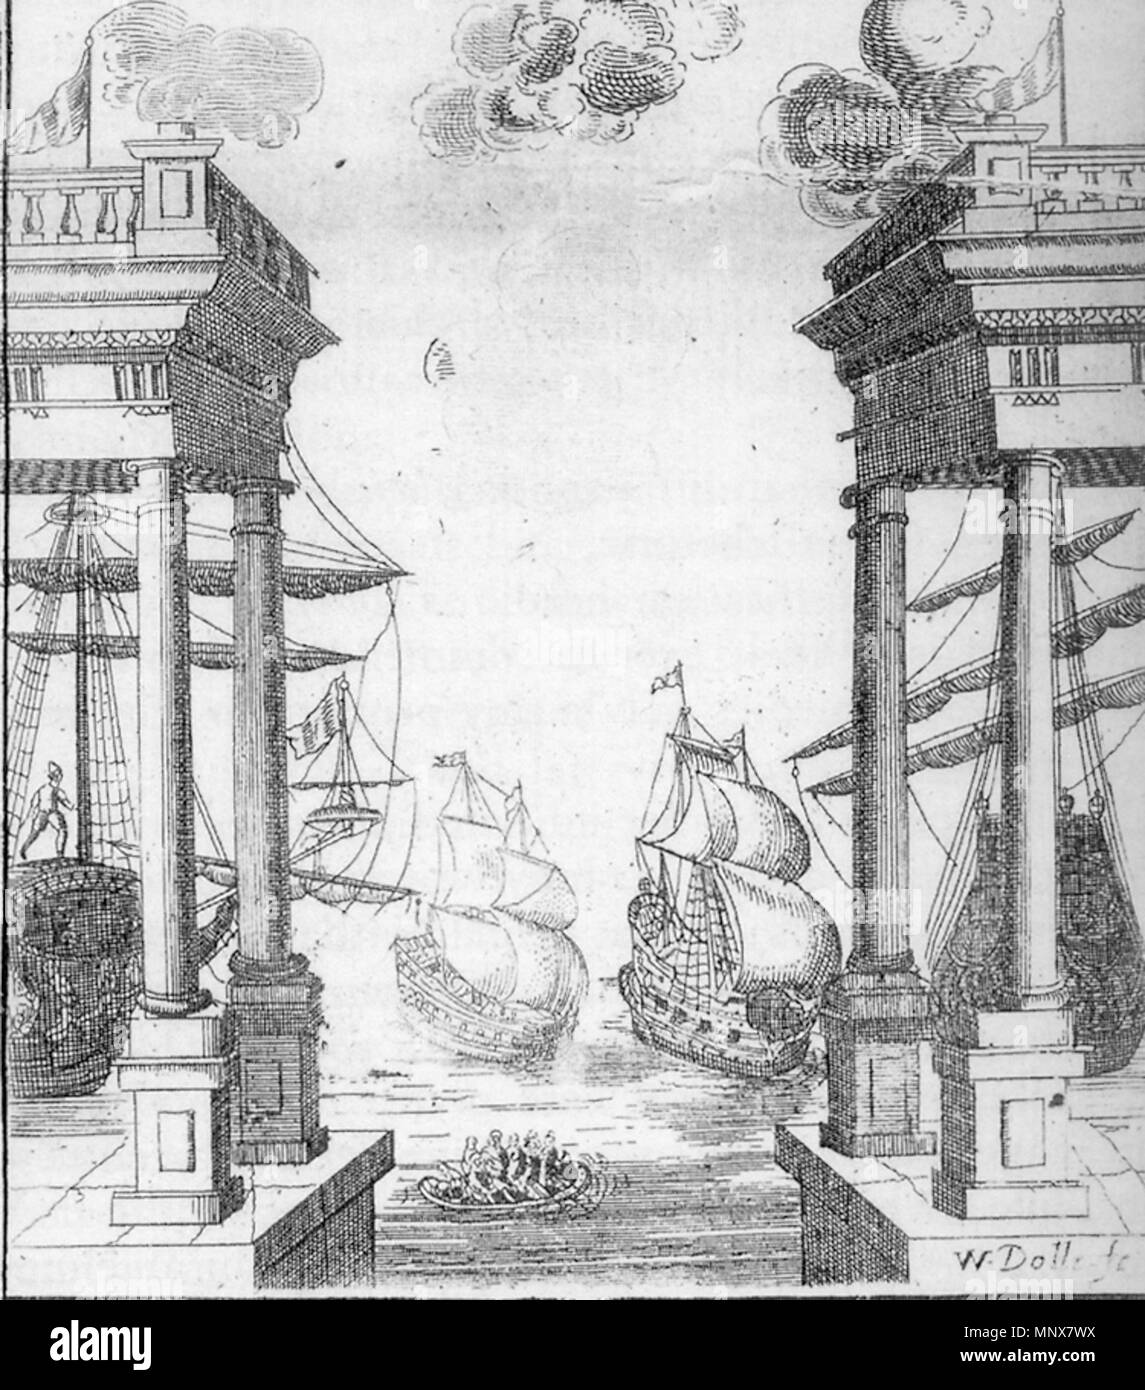 . English: Detail from the illustrated backdrop to Elkannah Settle's The Empress of Morocco (1673) at the Duke's Theatre, Dorset Garden, London. Plate facing page 8: engraving signed by William Dolle. . William Dolle 1113 Settle-Morocco-detail Stock Photo